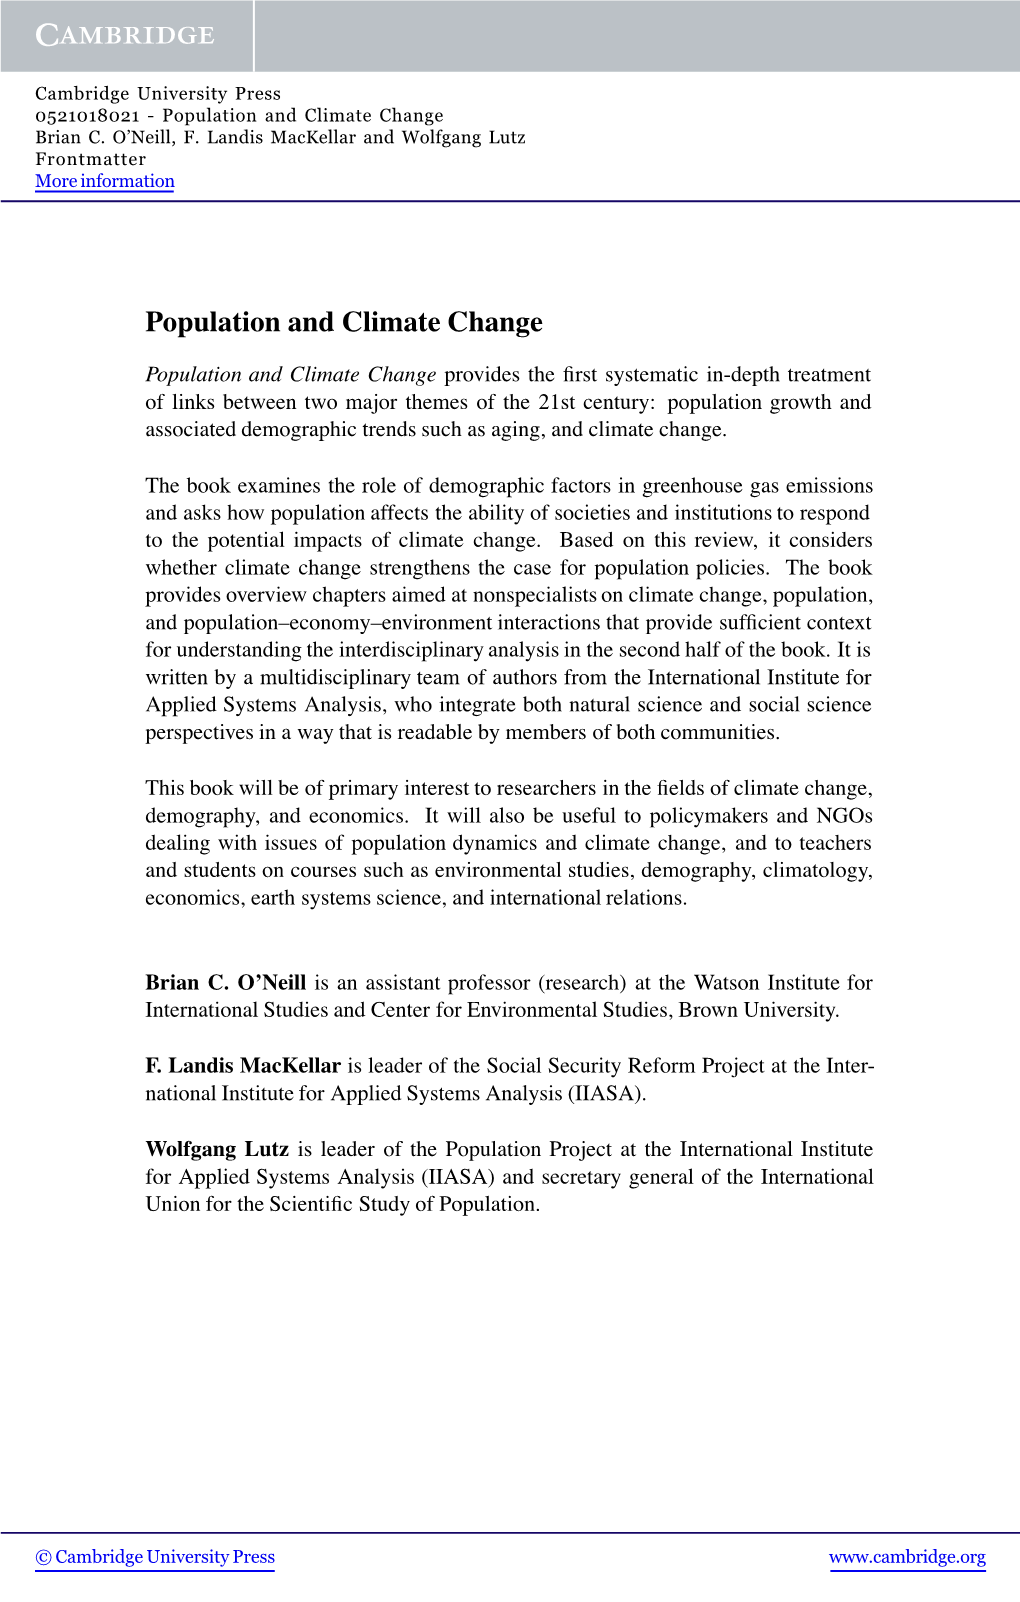 Population and Climate Change Brian C